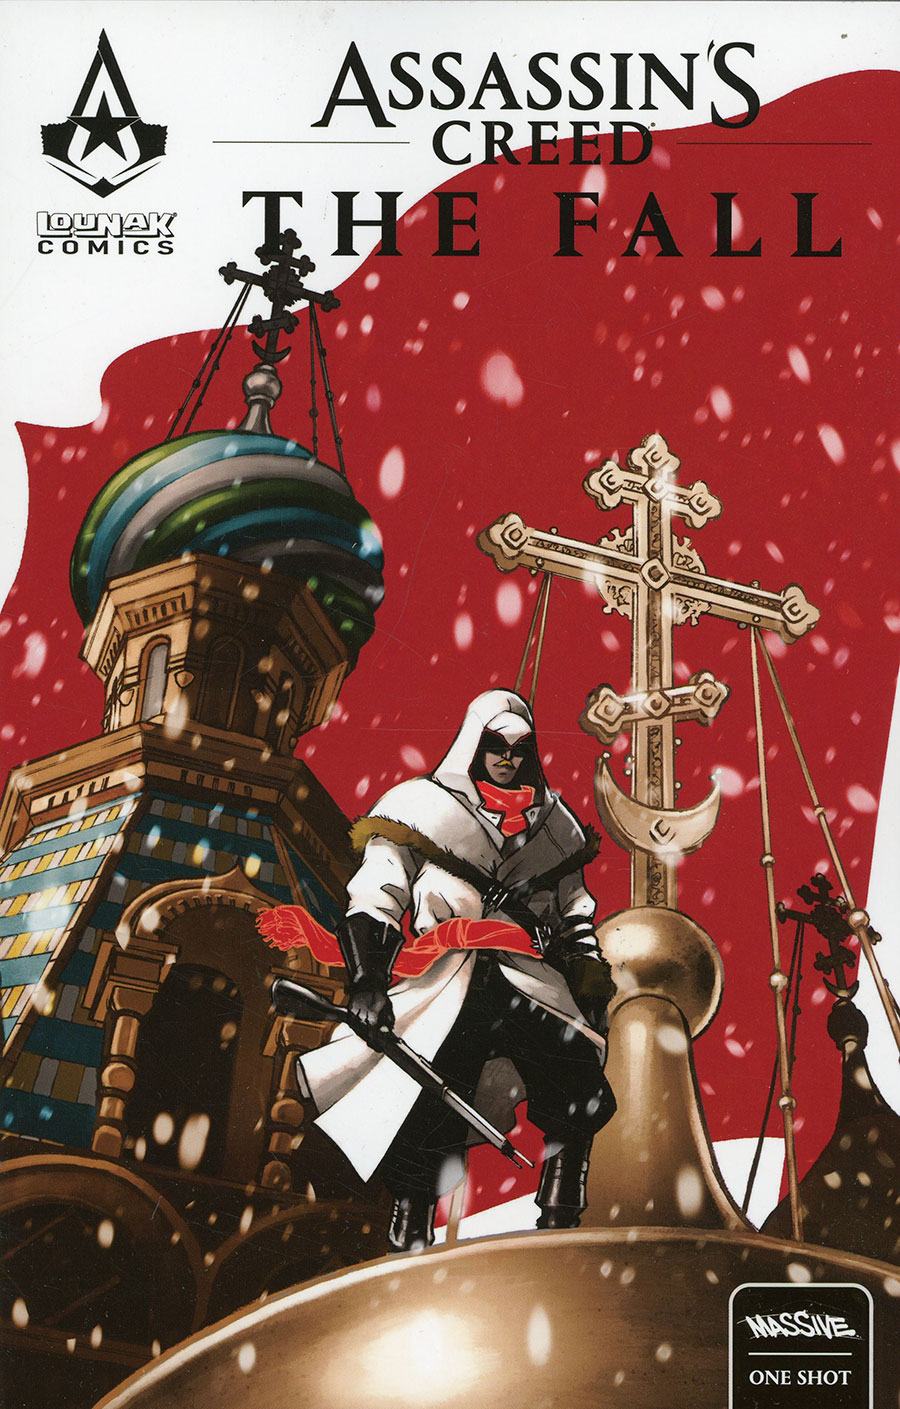 Assassins Creed The Fall #1 (One Shot) Cover D Variant Karl Kerschl & Cameron Stewart Cover